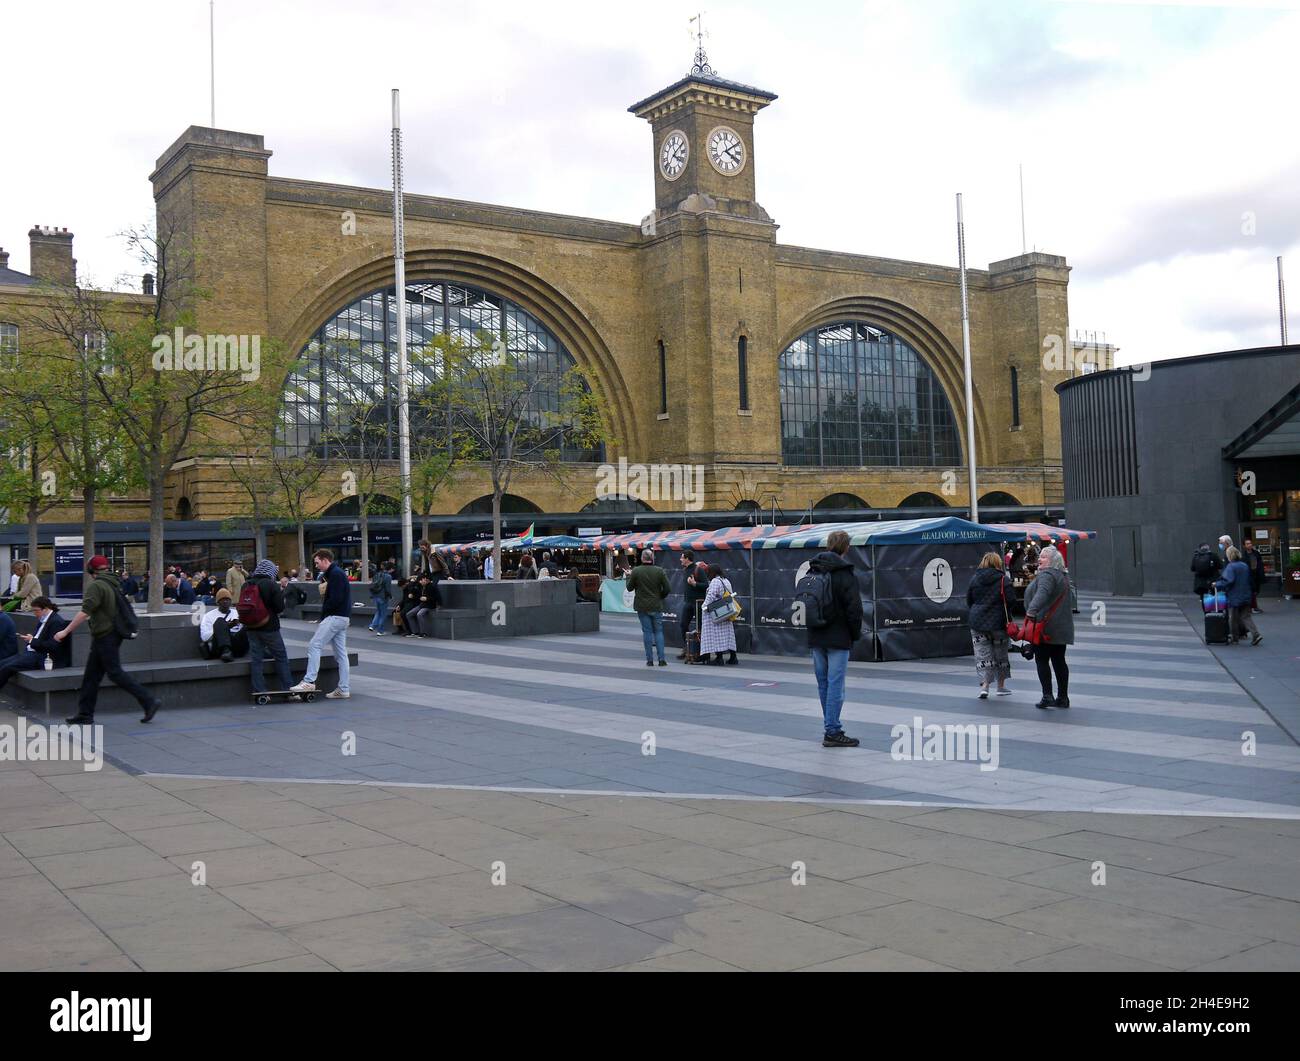 KINGS CROSS. LONDON. ENGLAND. 10-28-21. Kings Cross railway station frontage with a artisan food market on the forecourt. Stock Photo